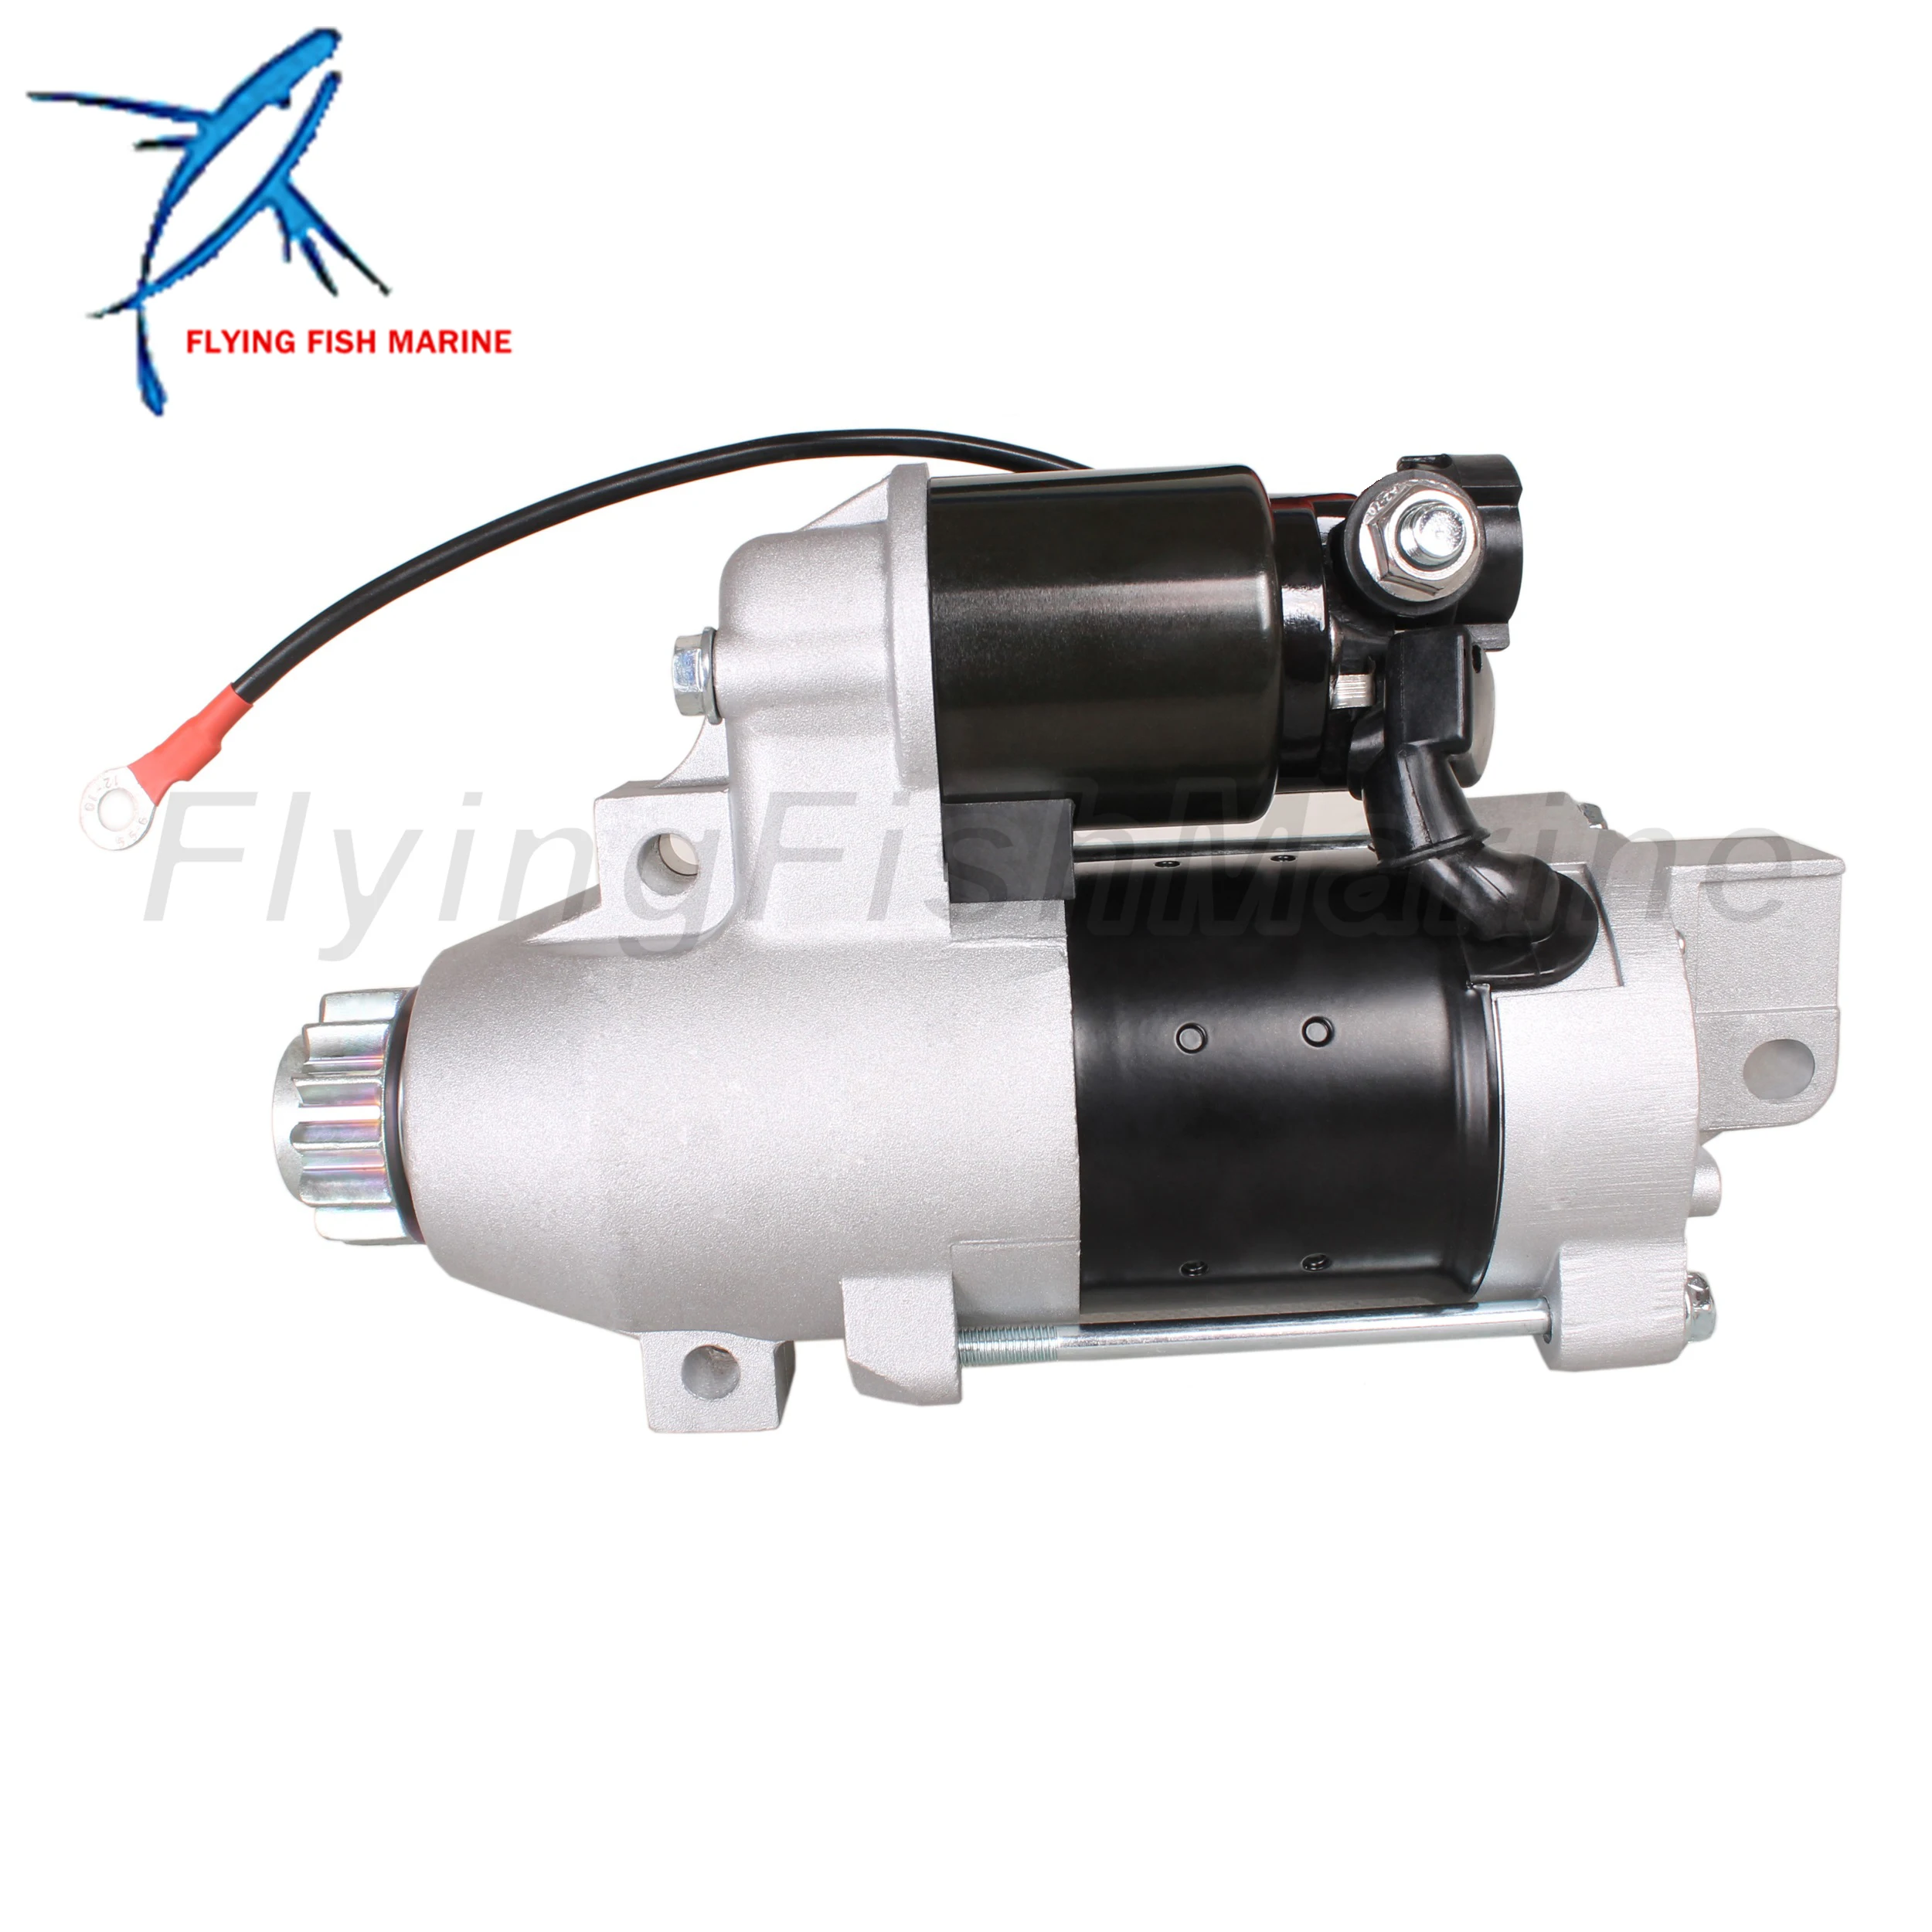 

Outboard 68V-81800-02/03/01/00 Starter Motor for Yamaha 75HP 90HP 115HP, 50-881368T 881368T1 881368T2 8M6007422 for Mercury